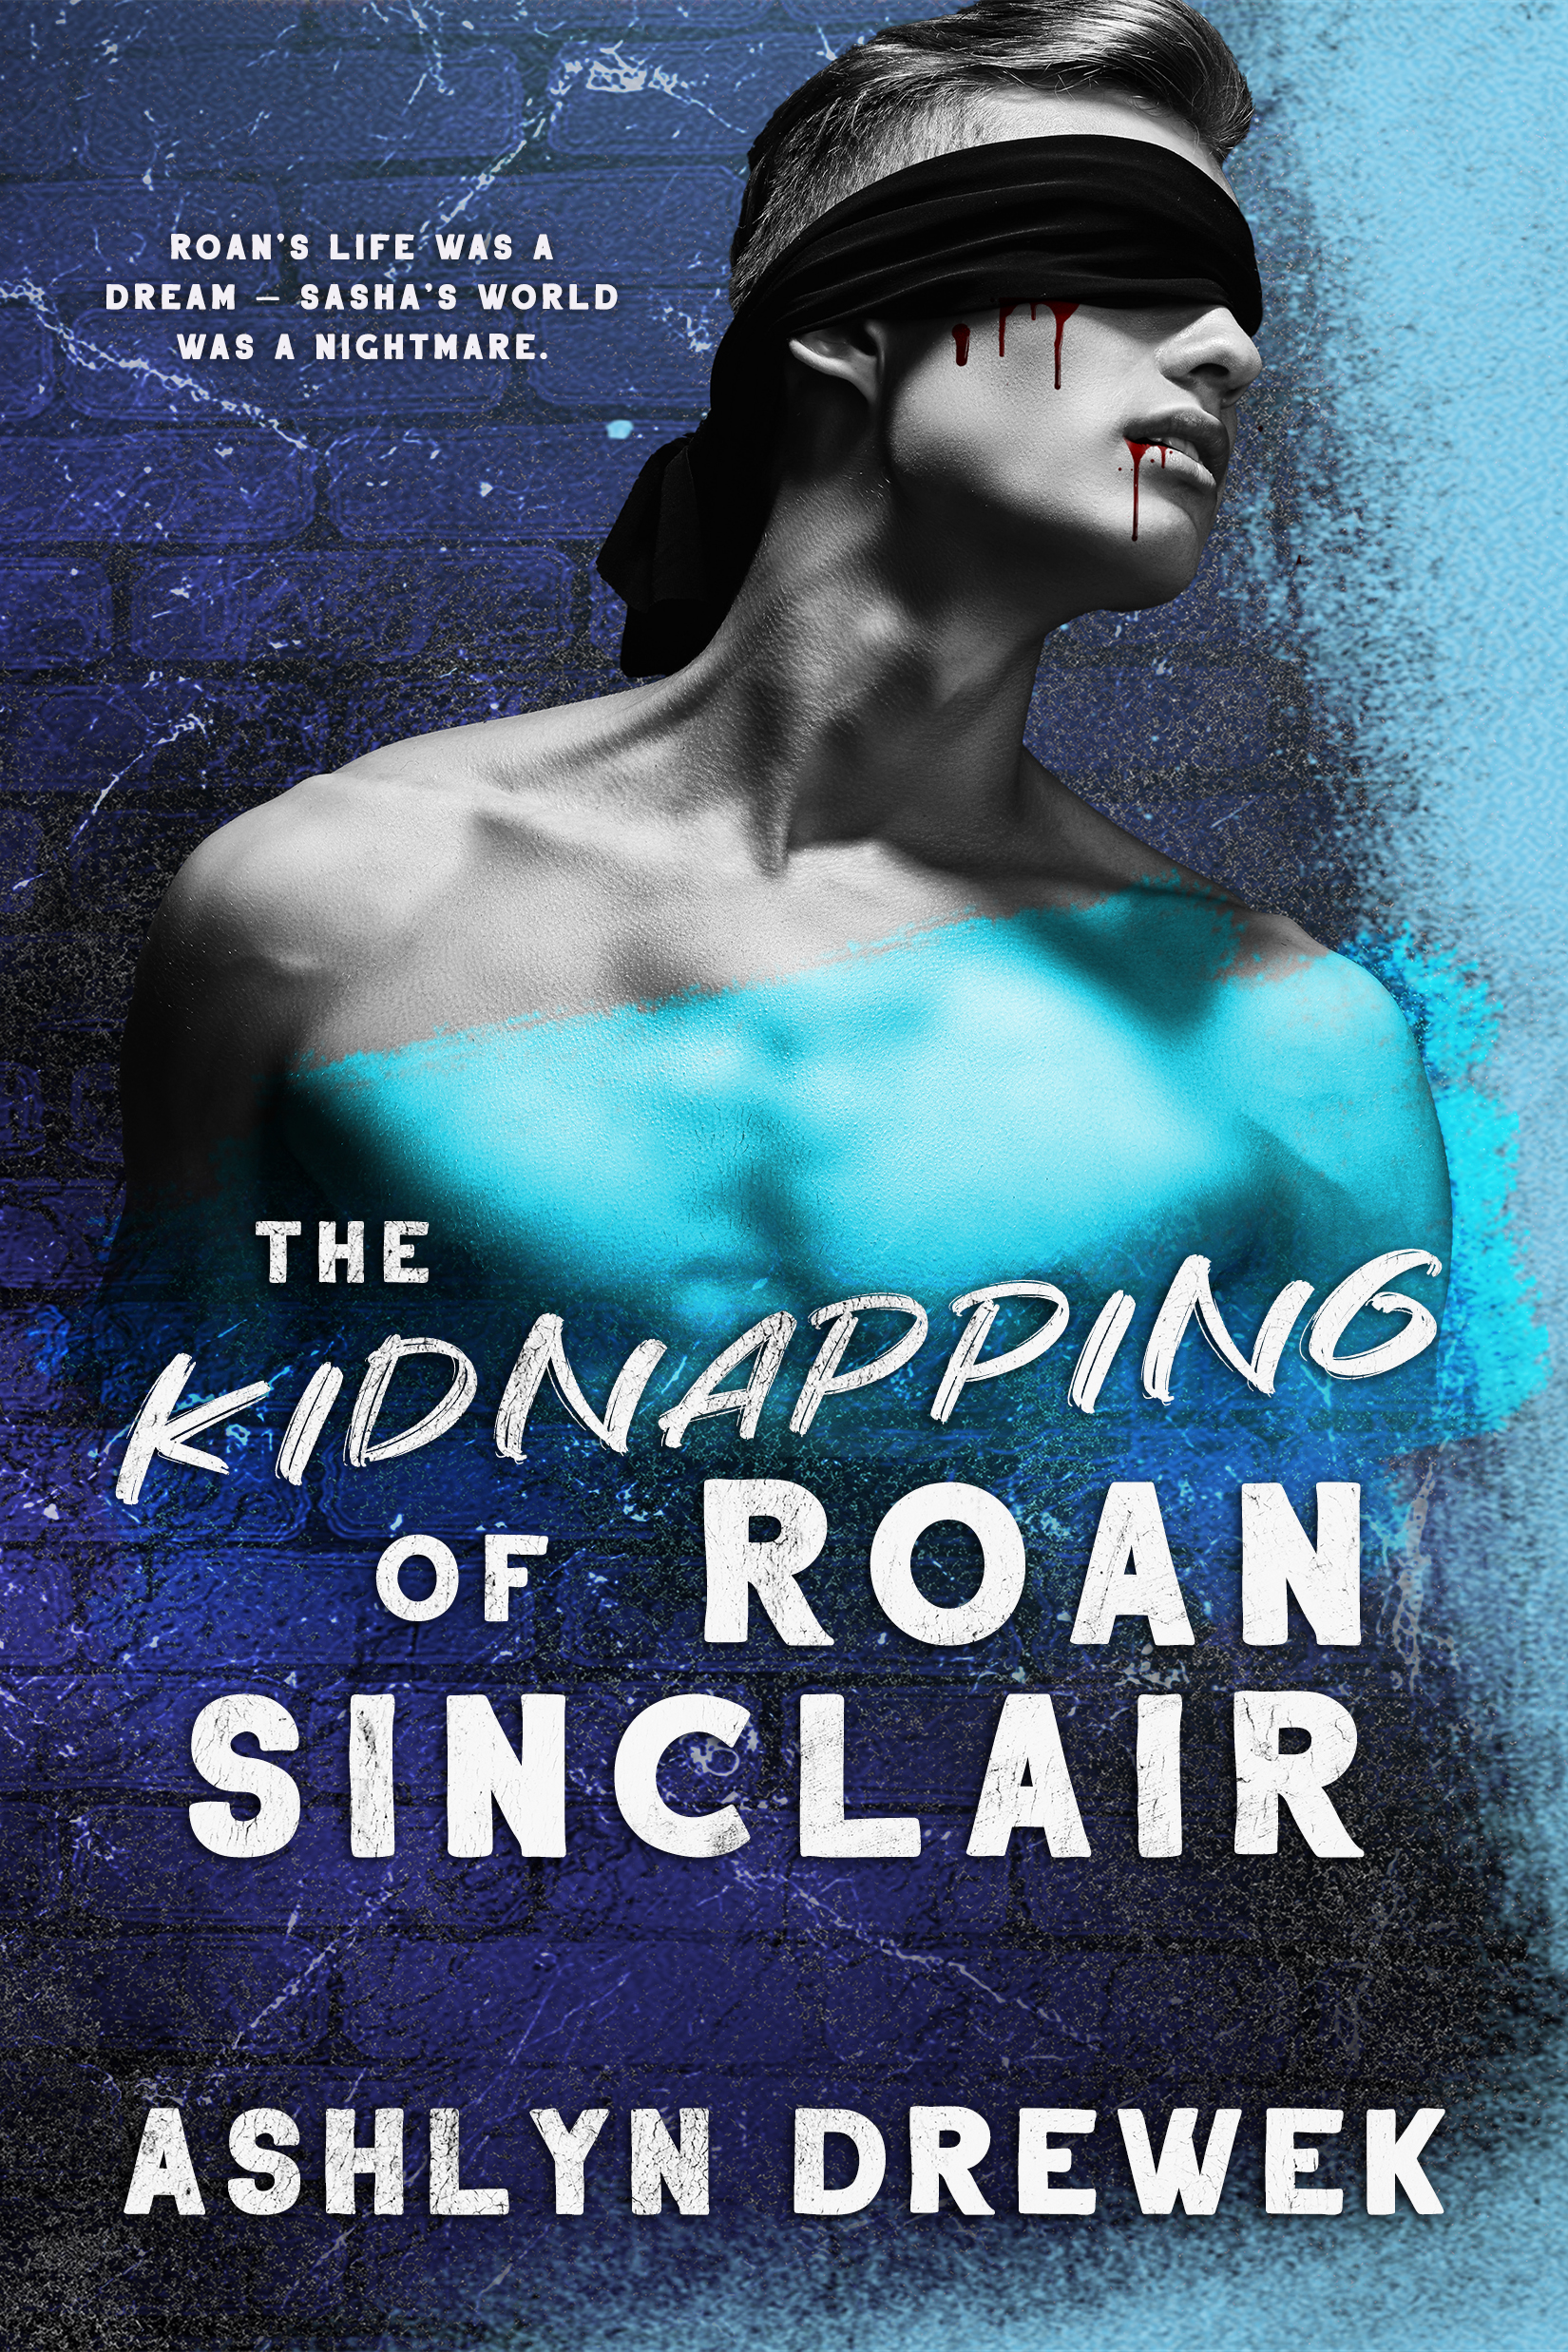 bradley cheshire recommends Kidnap And Rape Fantasy